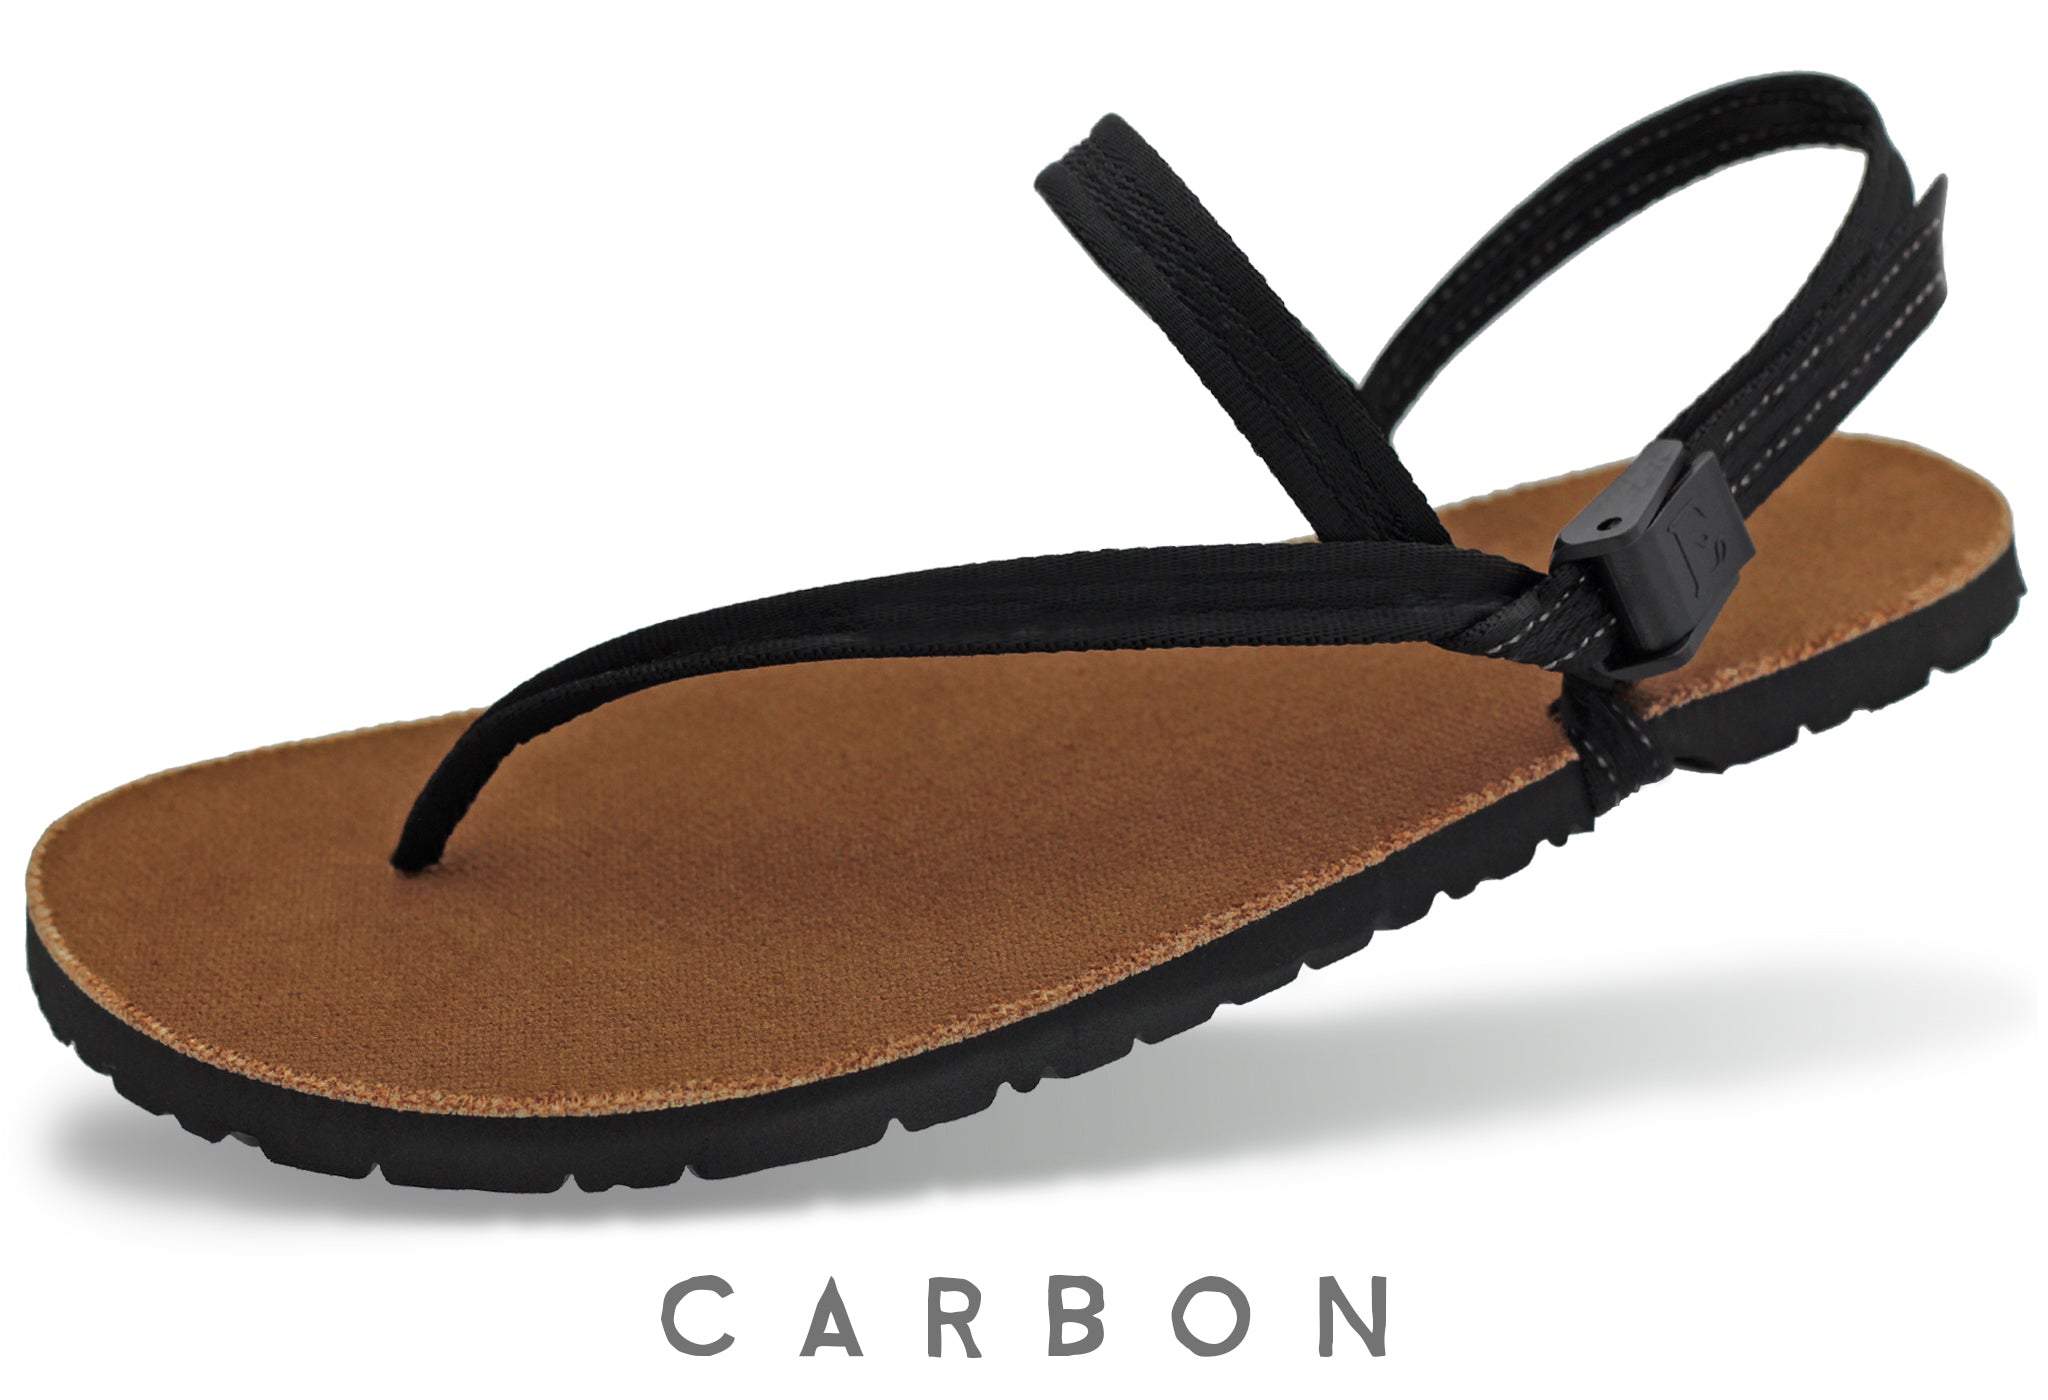 Alpha Sandals | Earth Runners Sandals - Reconnecting Feet with Nature